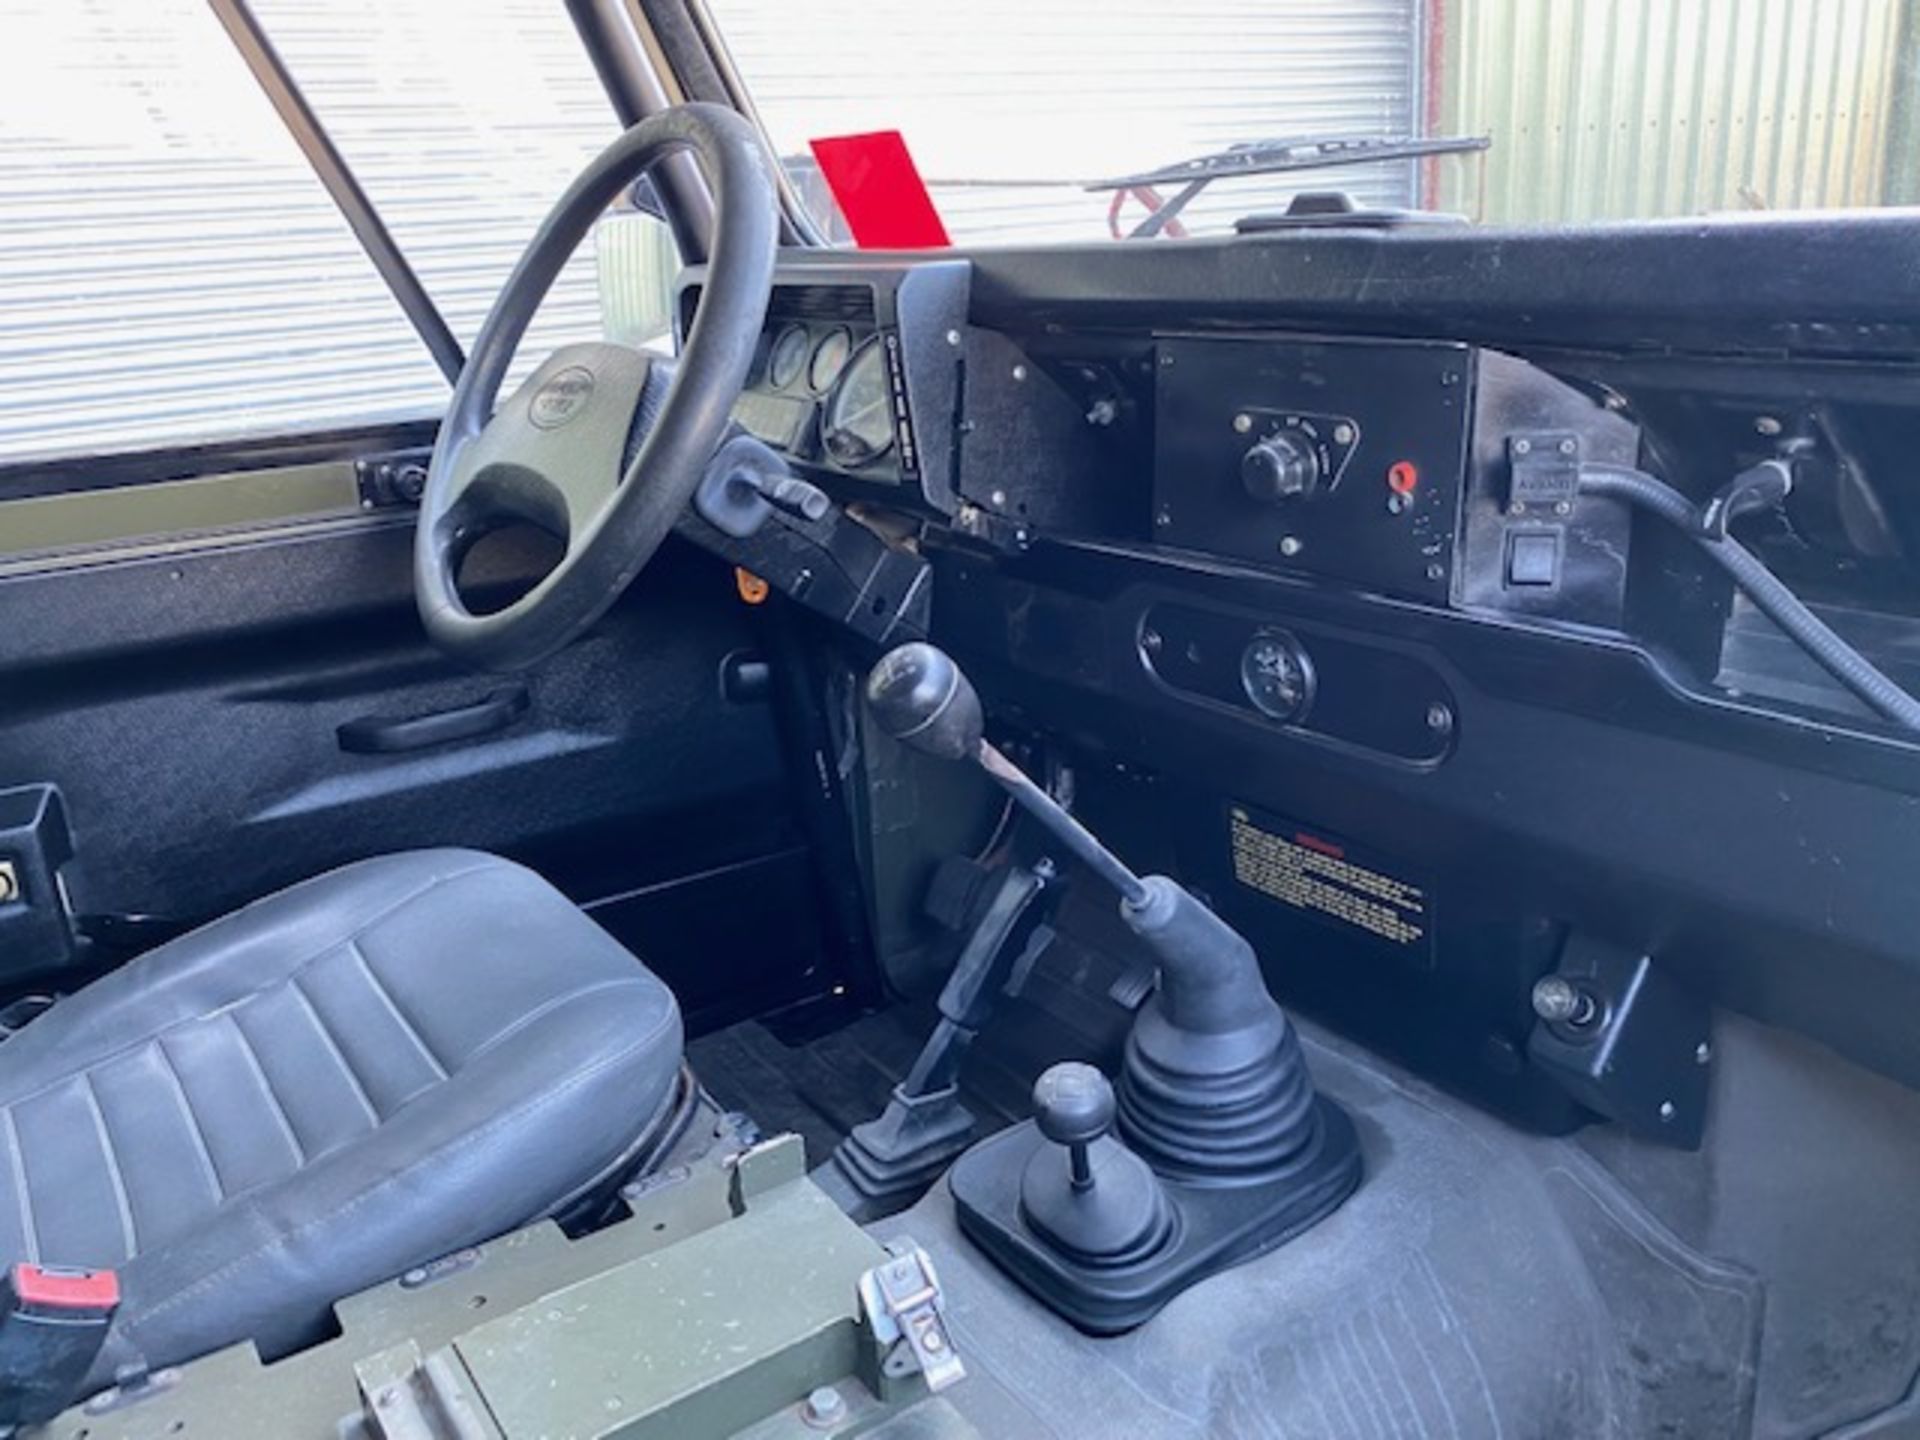 1997 Military Specification Left Hand Drive Land Rover Wolf 110 FFR Hard Top ONLY 172,783Km - Image 27 of 50